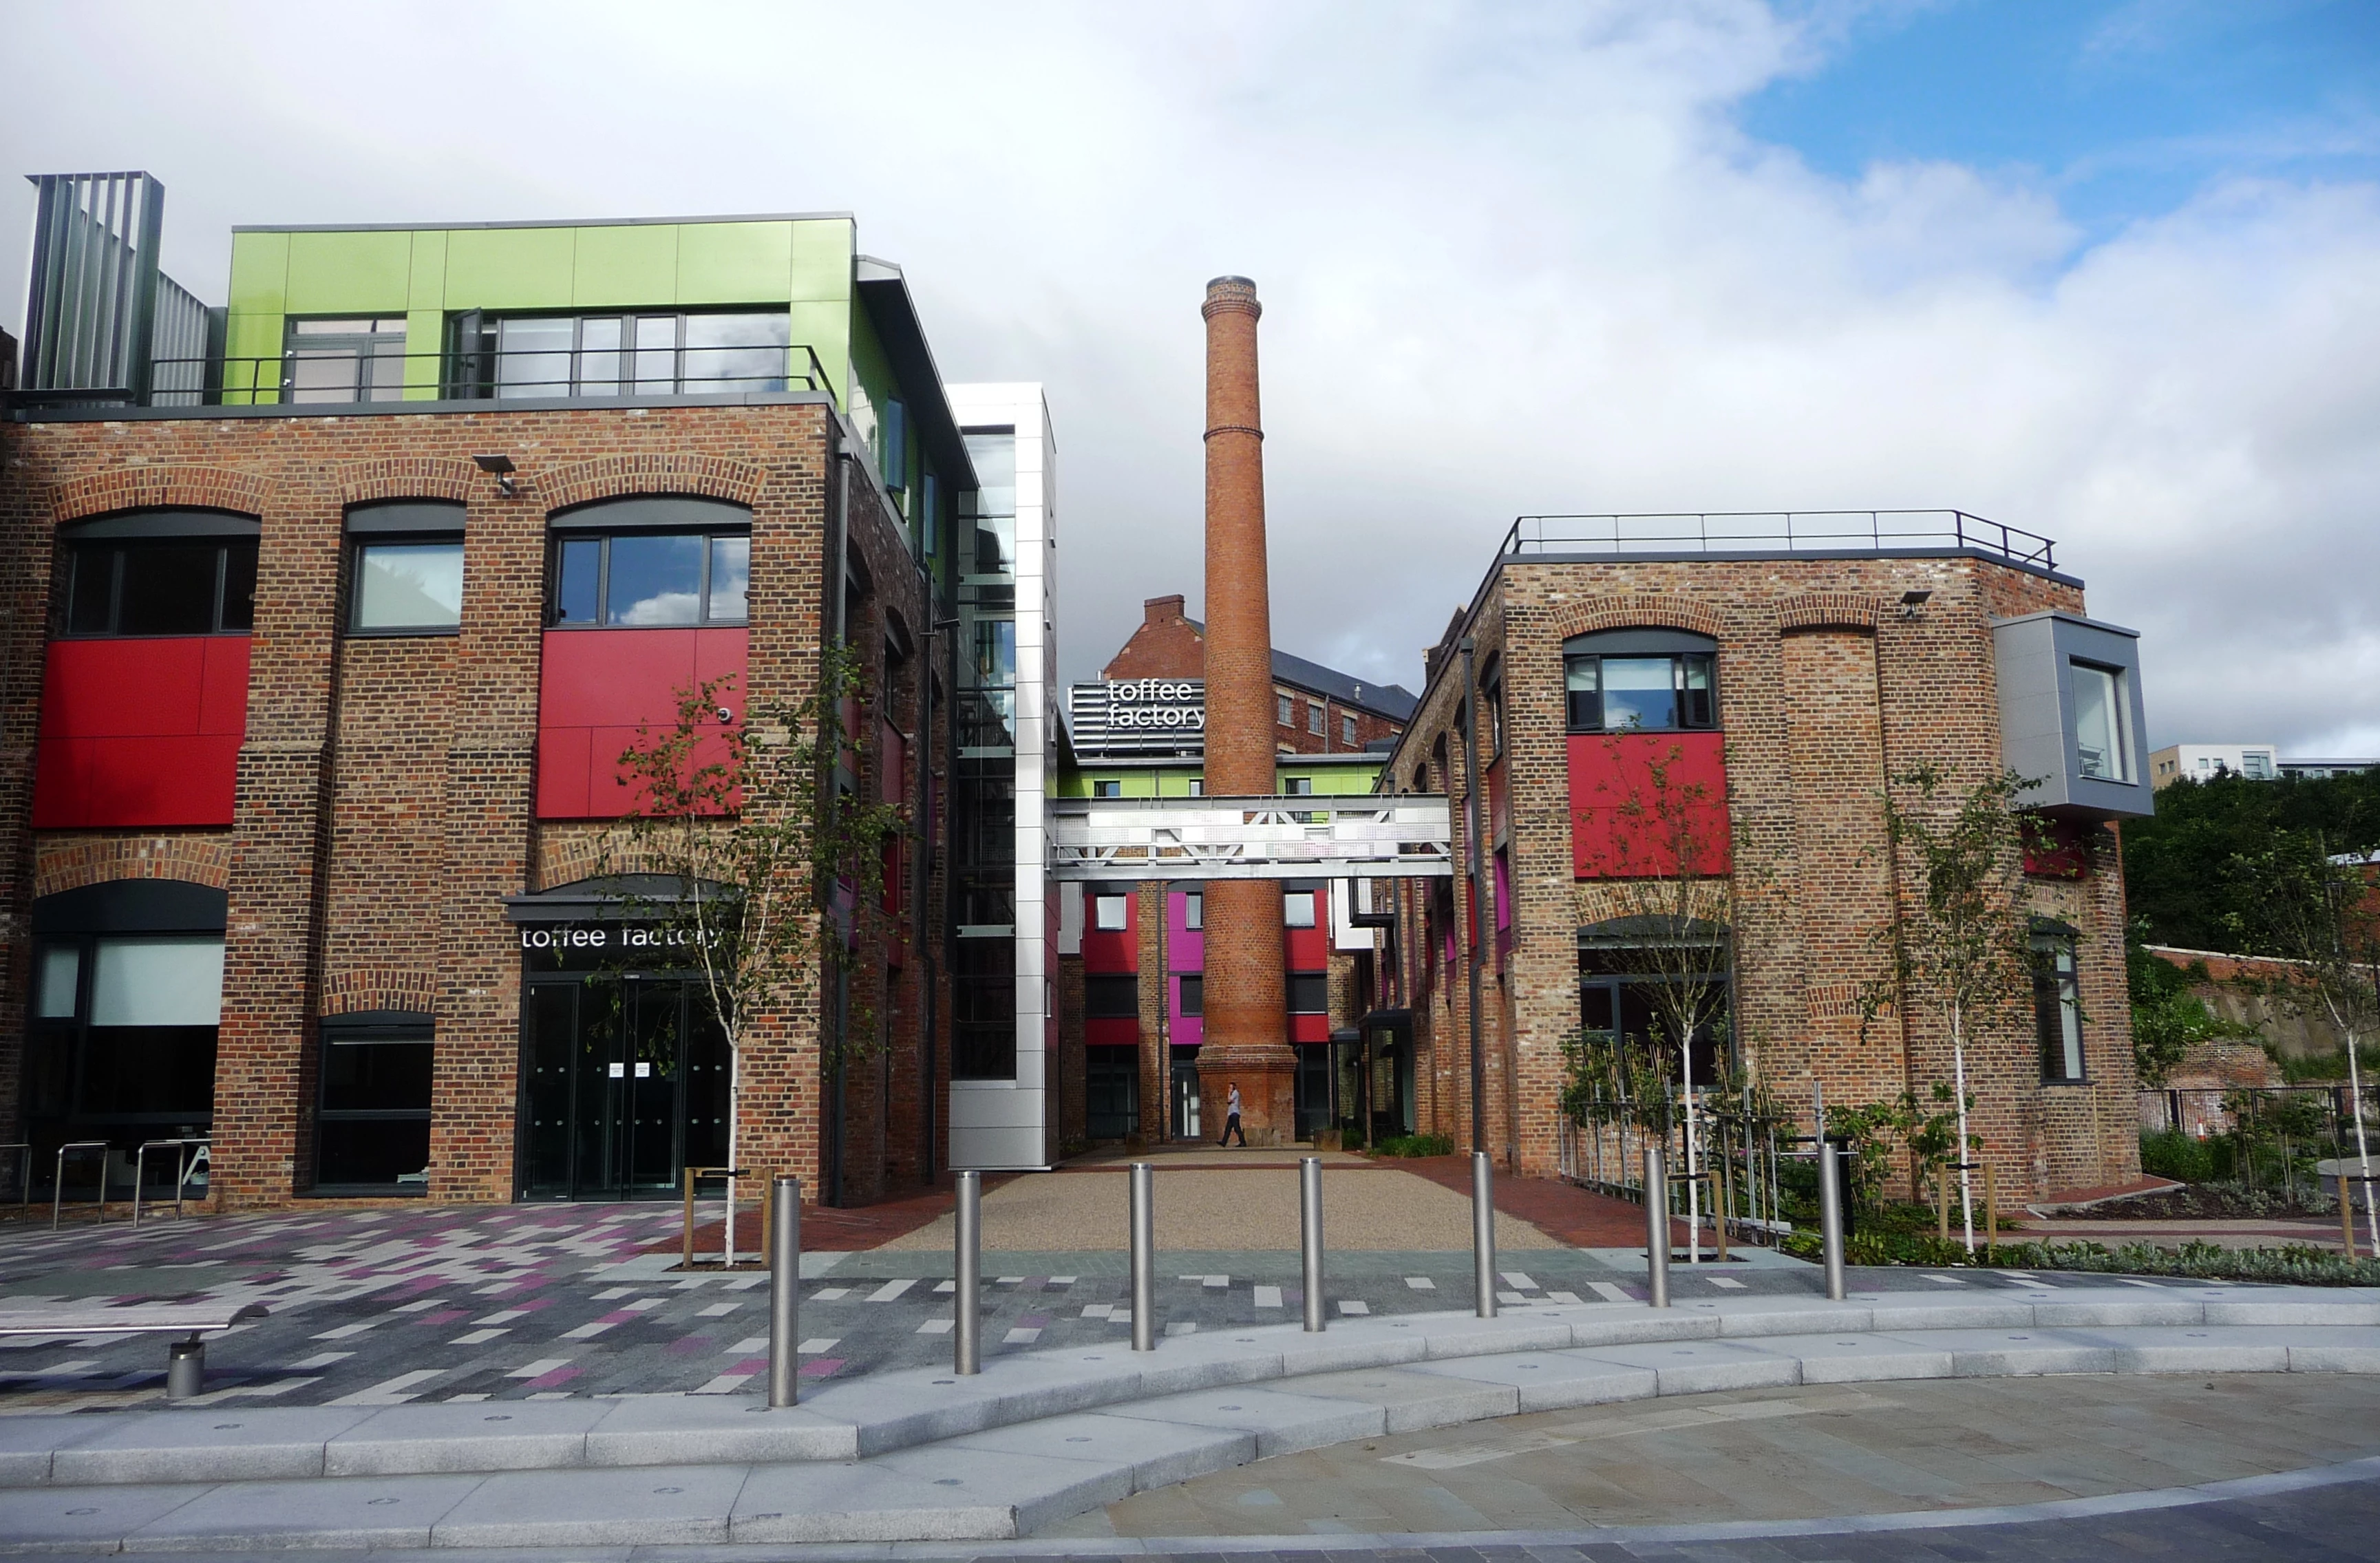 Toffee Factory